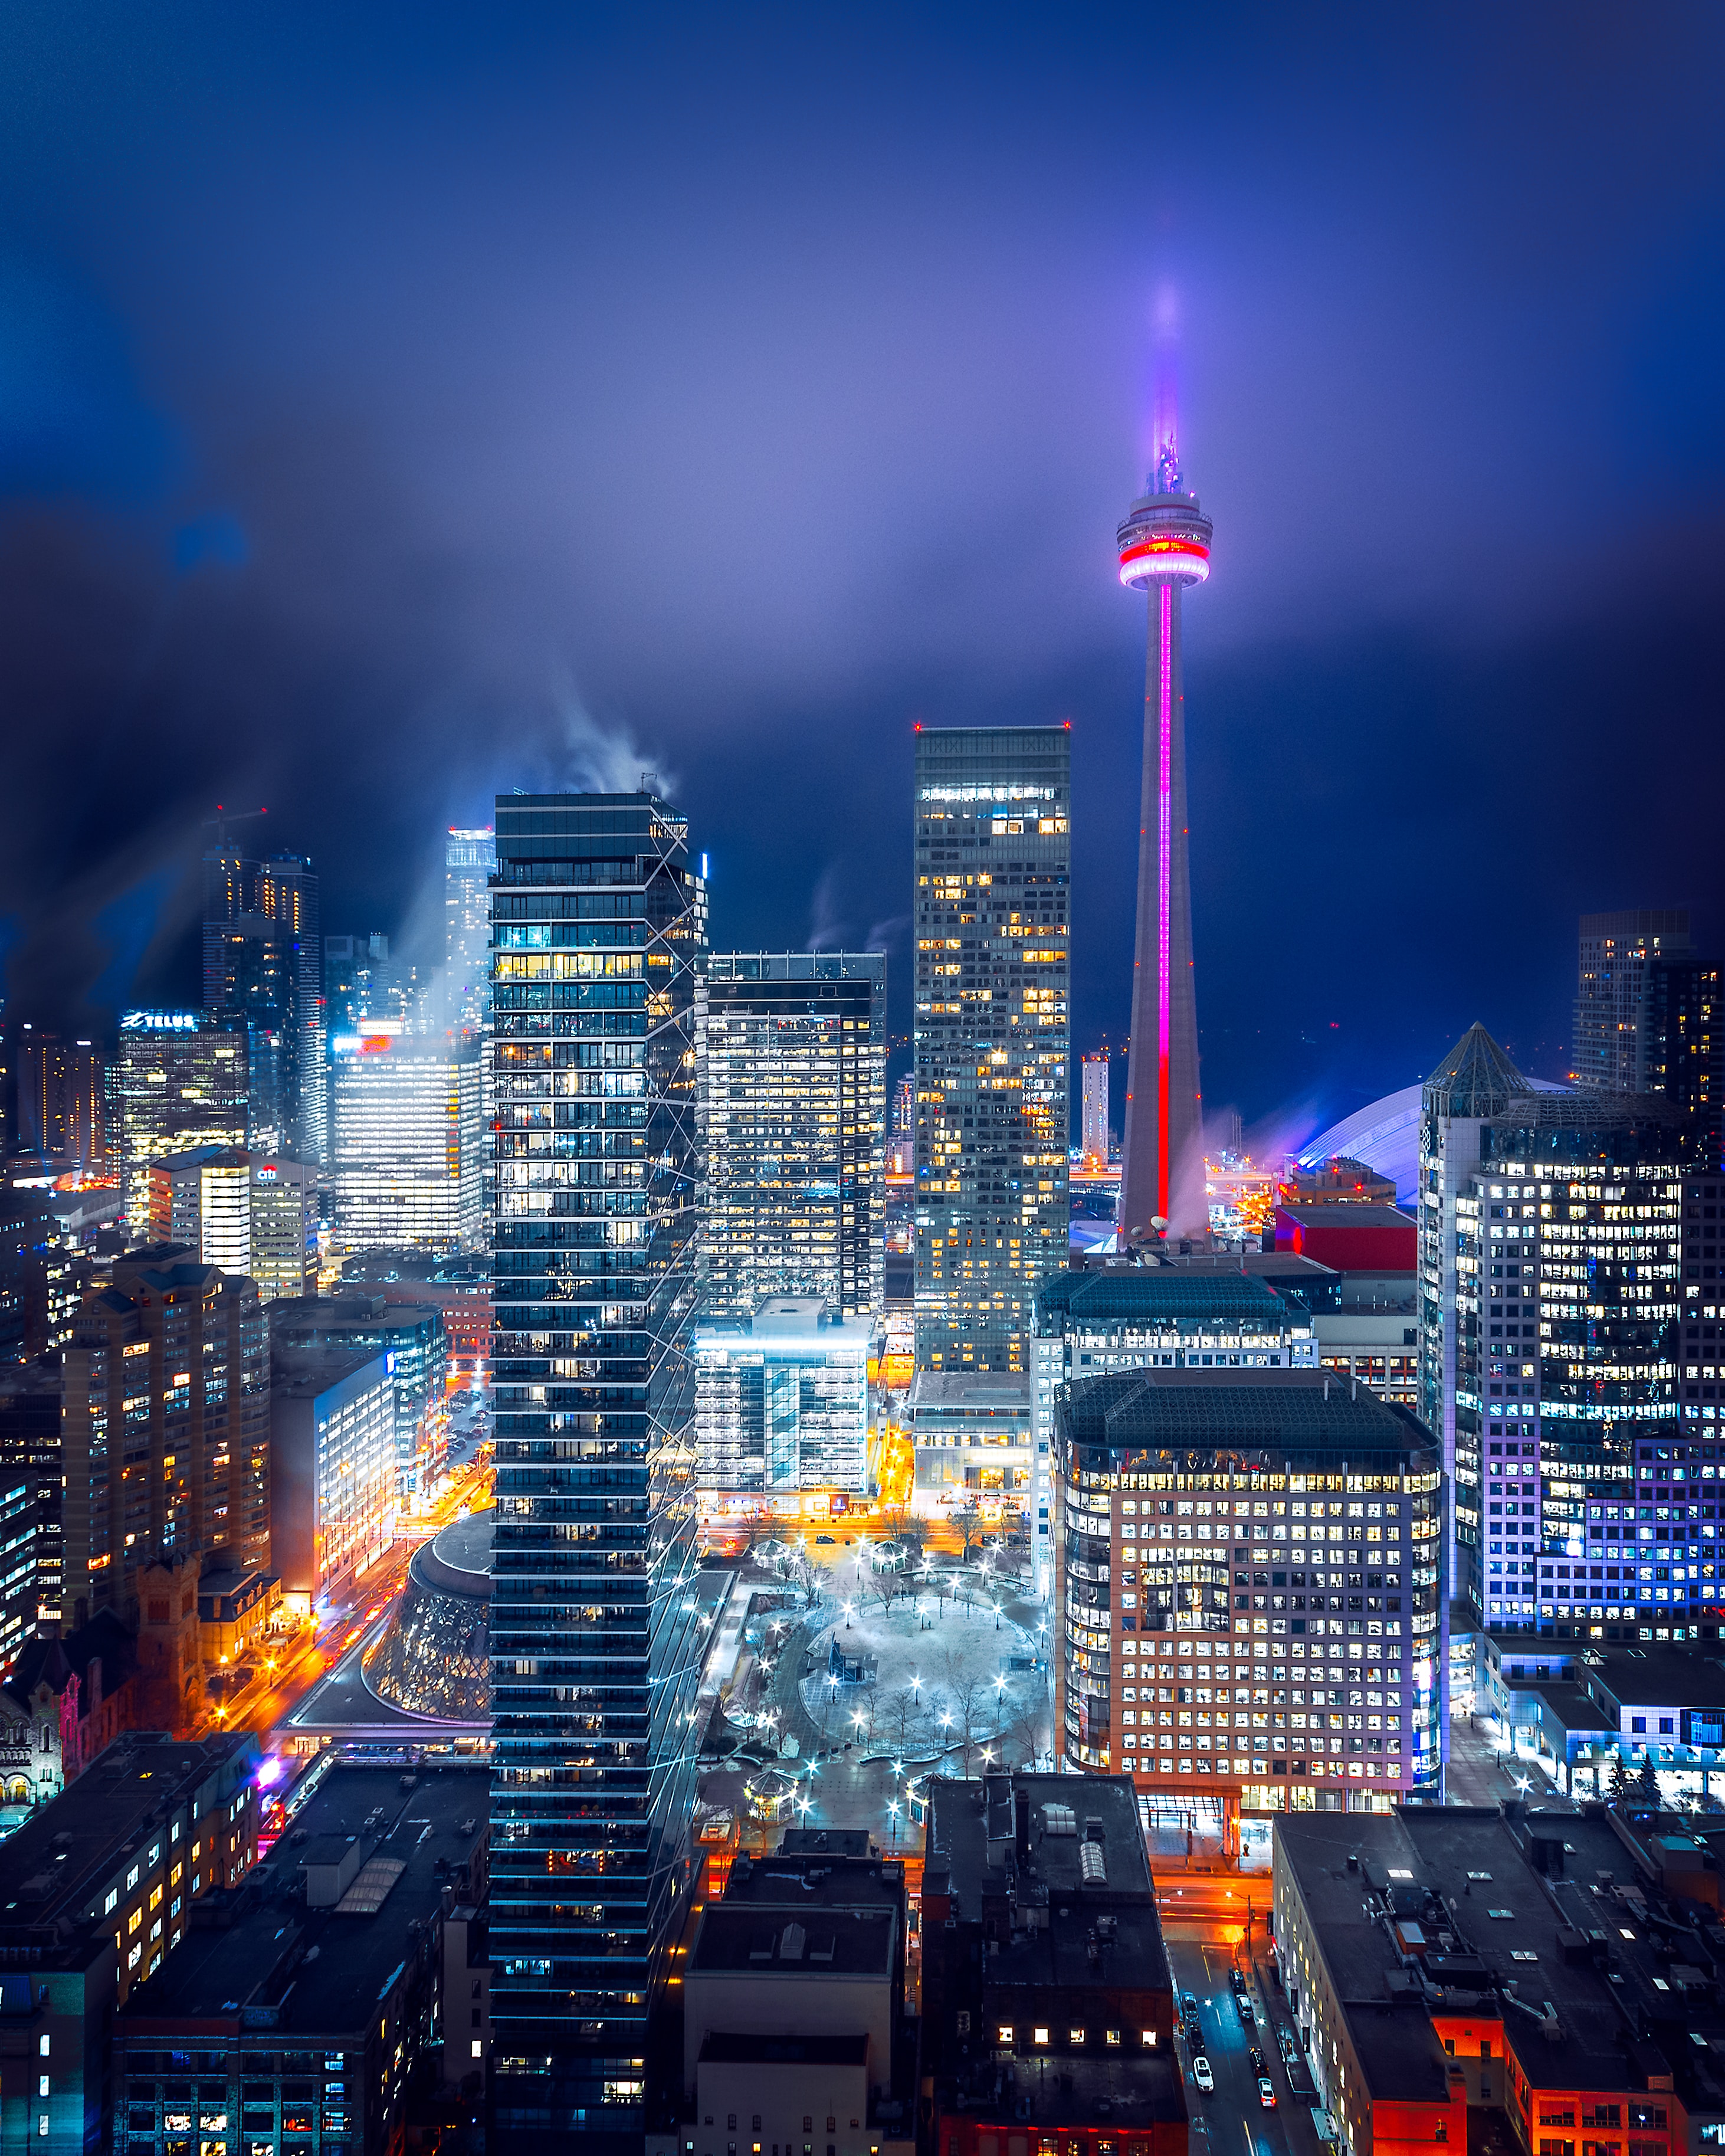 android building, night city, toronto, cities, lights, view from above, bright